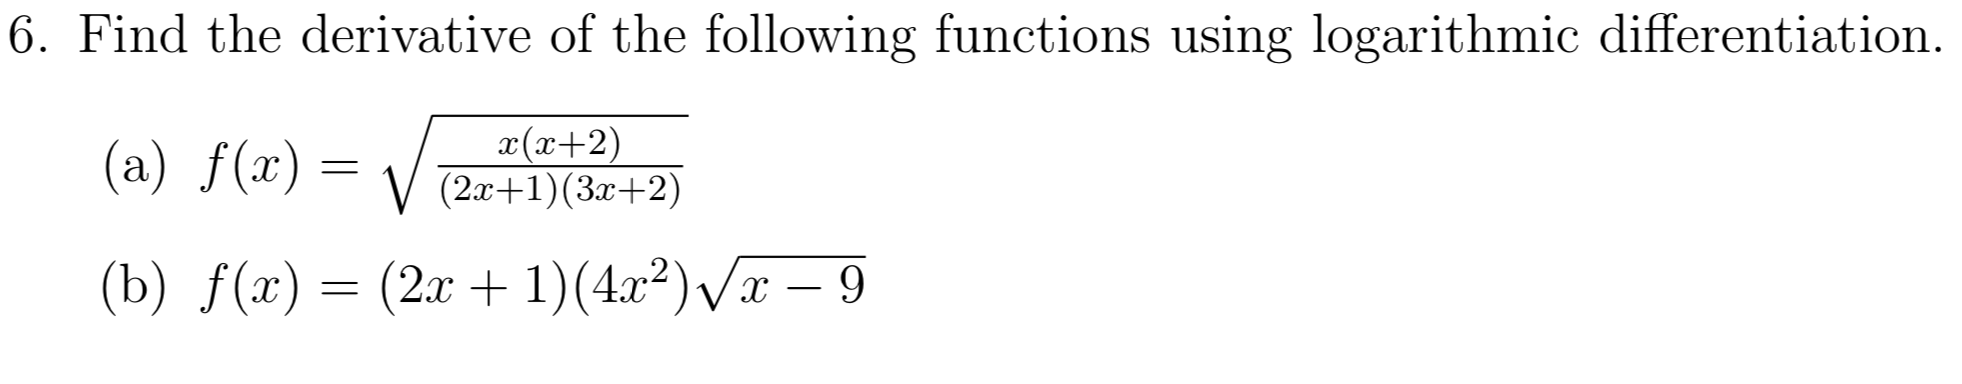 |6. Find the derivative of the following functions using logarithmic differentiation.
x(x+2)
(2x+1) (3+2)
(a) f(x)
(2r1)(422)x - 9
(b) f(x)
